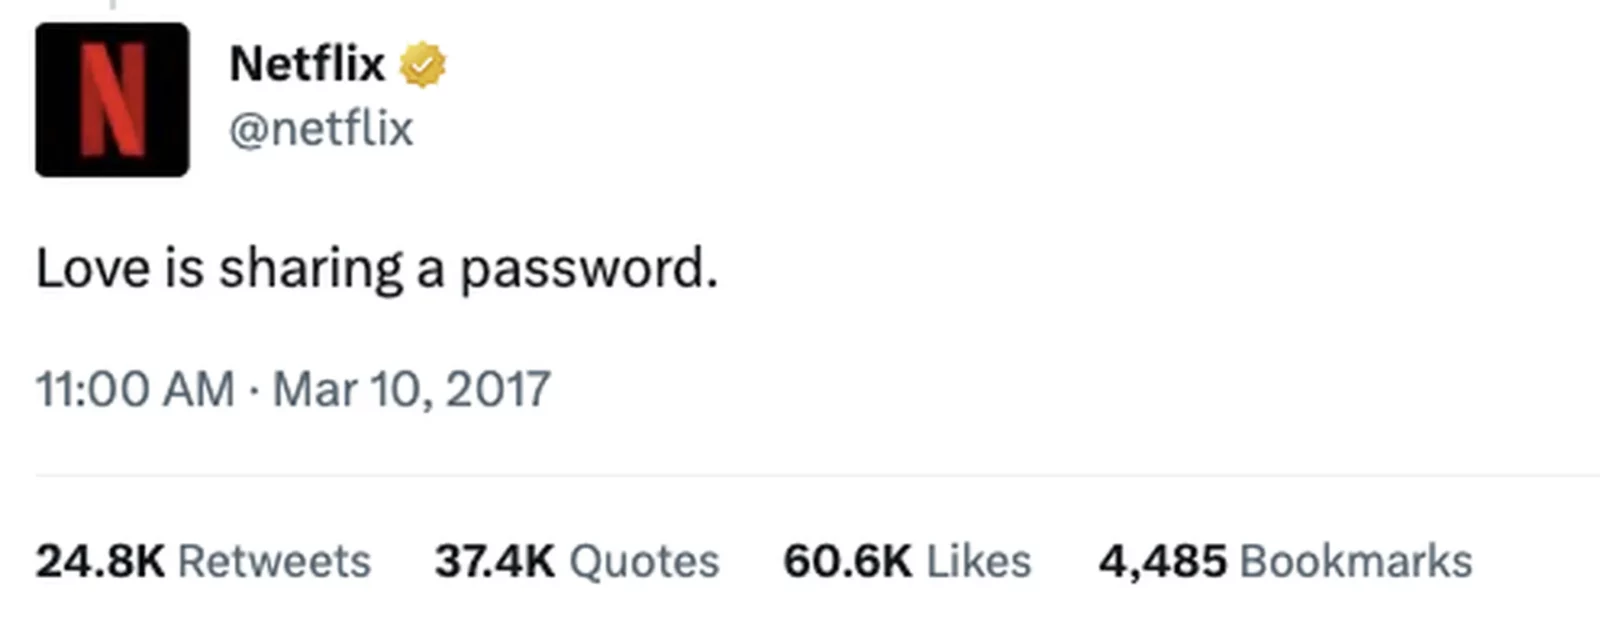 A popular netflix account is promoting the idea that sharing a password with someone is a sign of love. Full text: n netflix @netflix love is sharing a password. 11:00 · mar 10, 2017 24. 8k retweets 37. 4k quotes 60. 6k likes 4,485 bookmarks